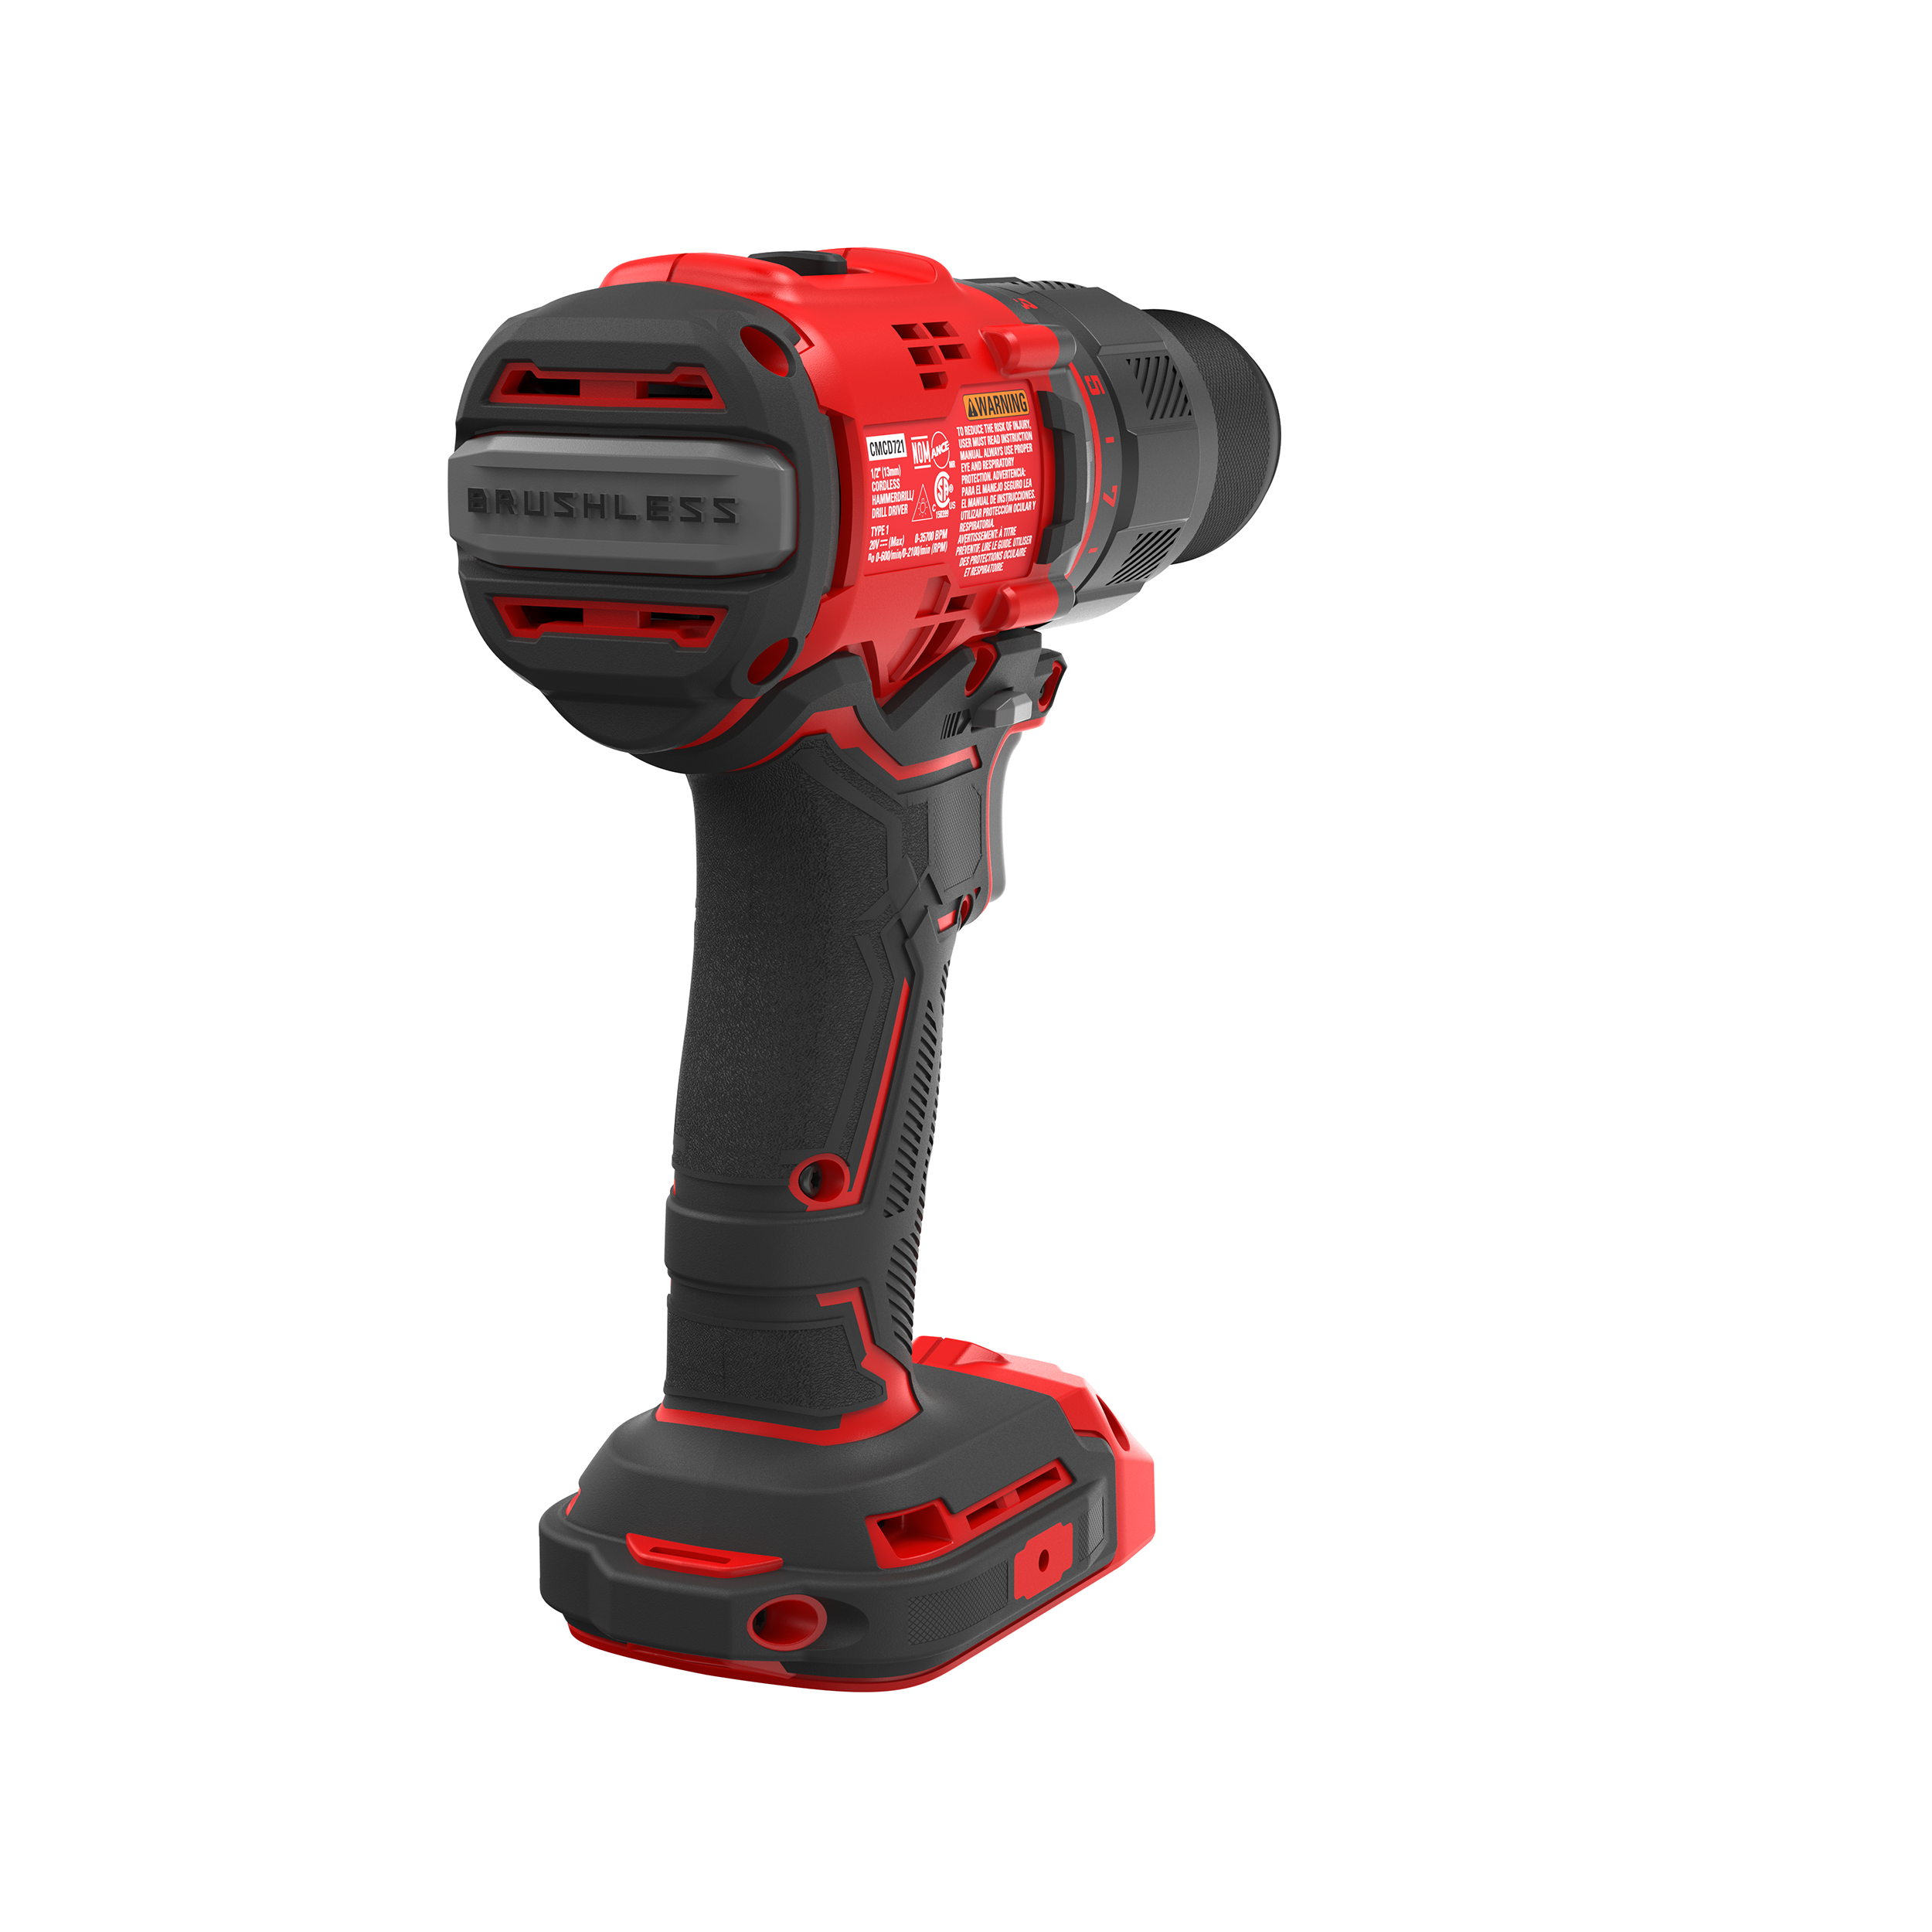 V20* Cordless Brushless 1/2-in Hammerdrill (Tool Only) | CRAFTSMAN